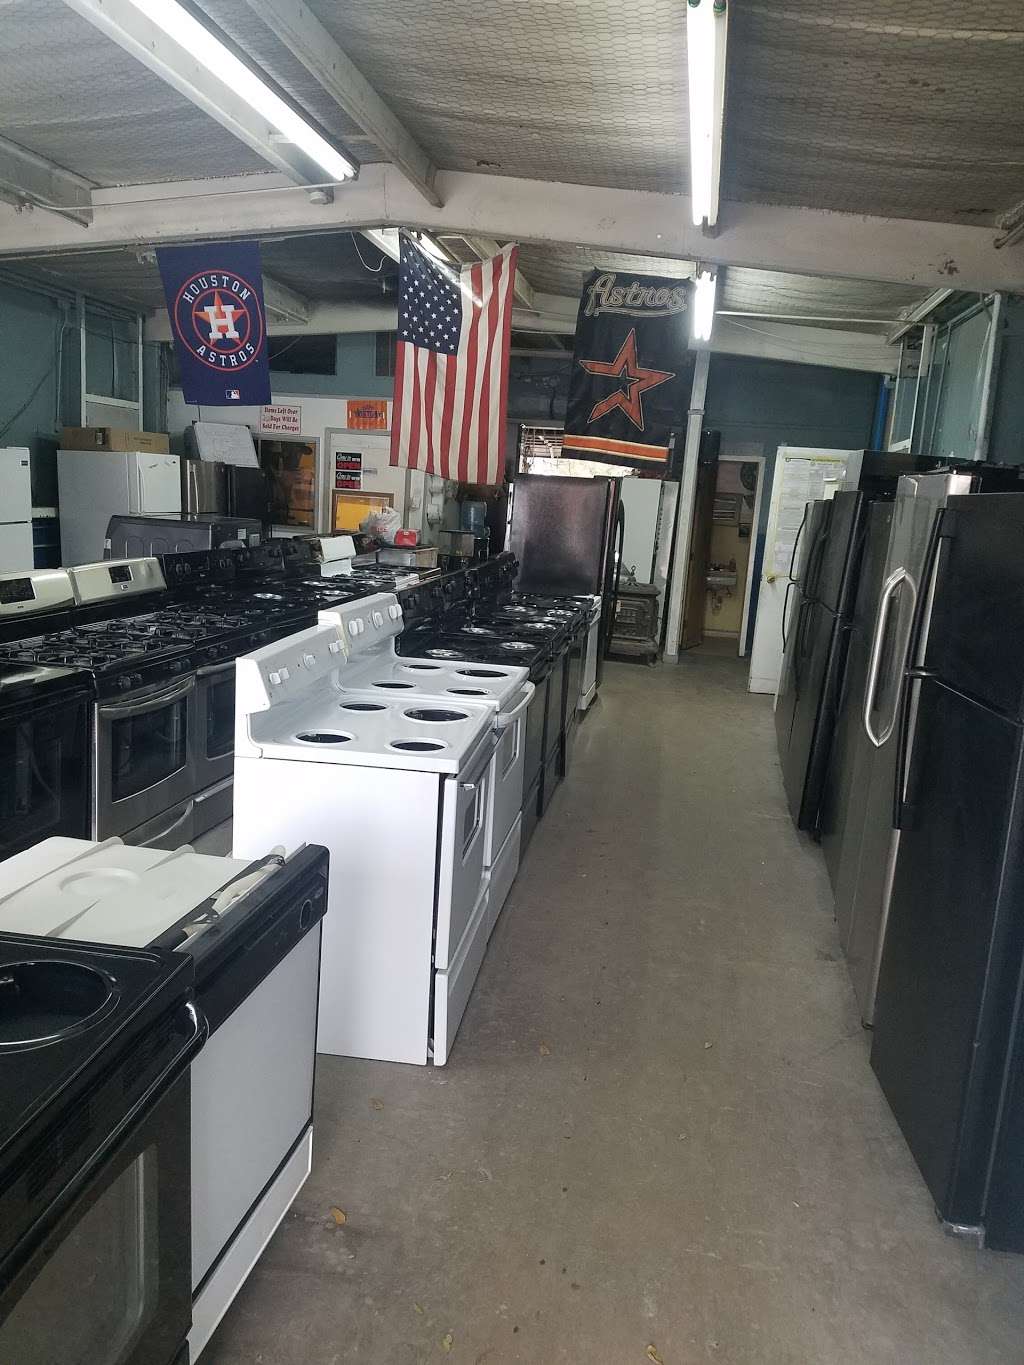 AwAppliance sales and service | 9235 N Houston Rosslyn Rd, Houston, TX 77088, USA | Phone: (713) 697-0335